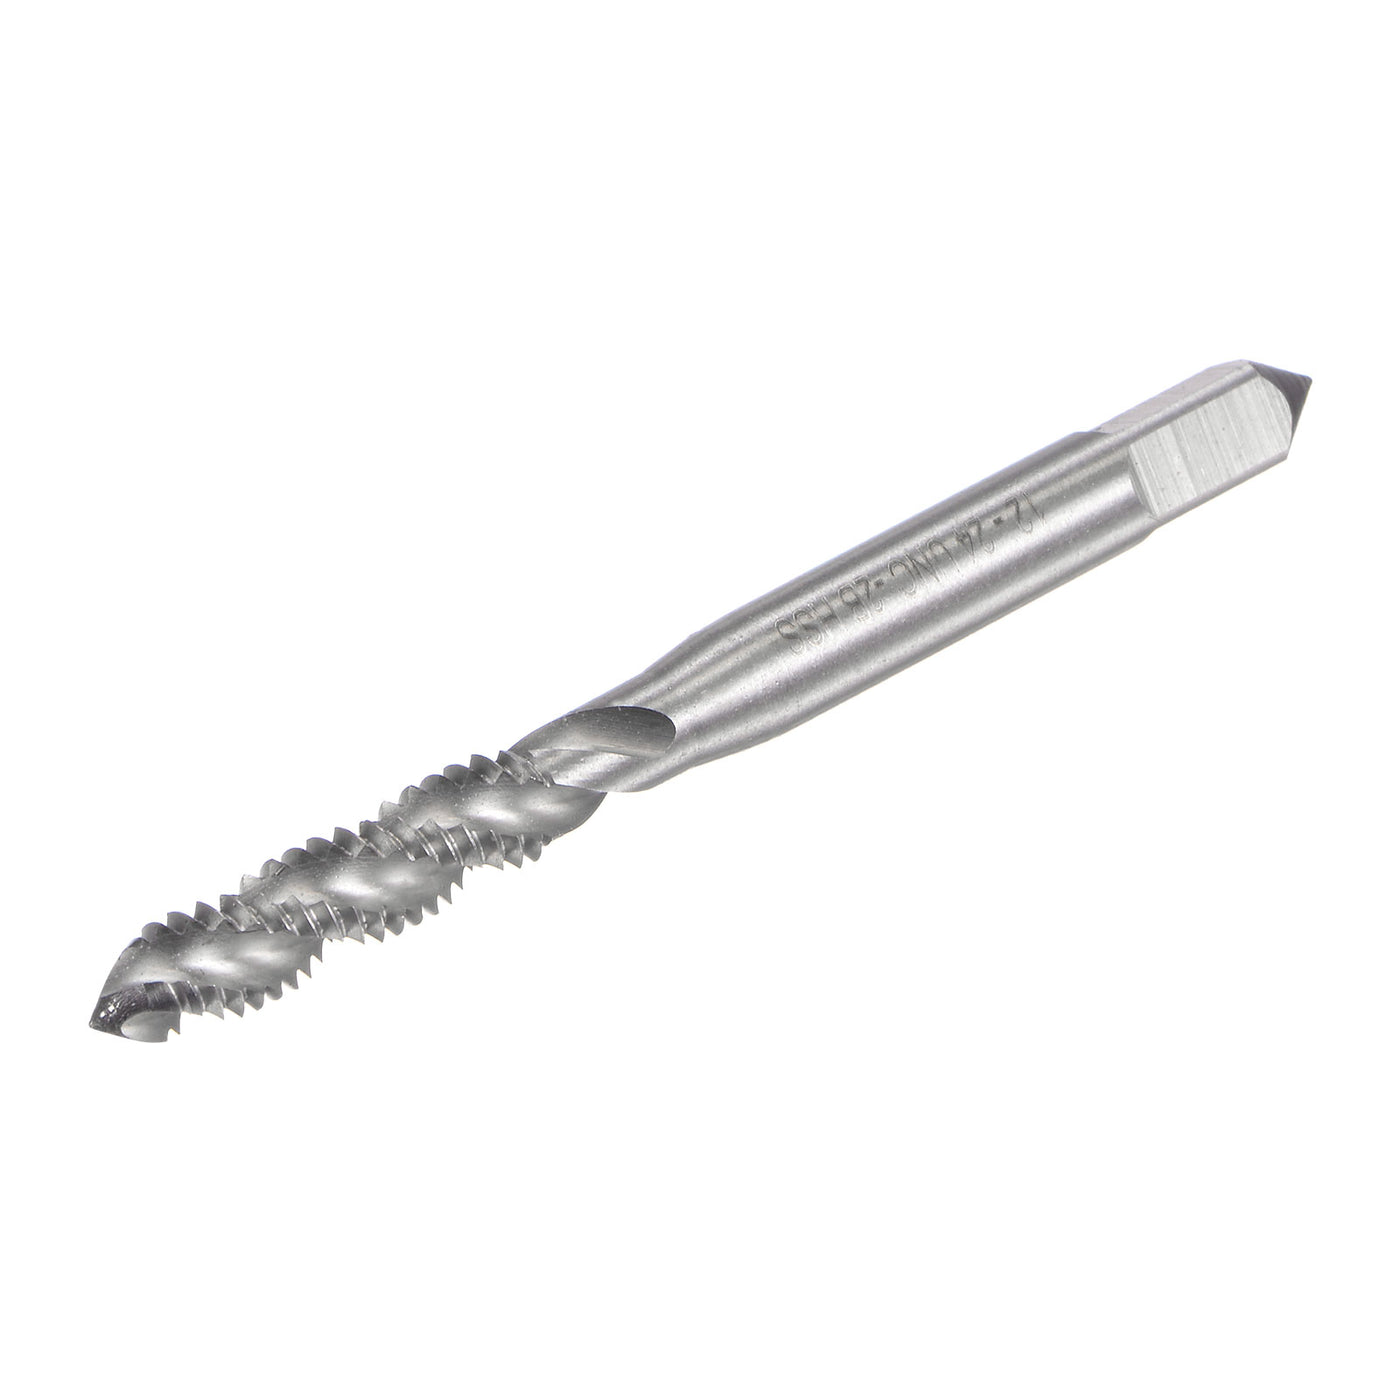 uxcell Uxcell 12-24 UNC 2B High Speed Steel Uncoated Machine Spiral Flutes Threading Tap